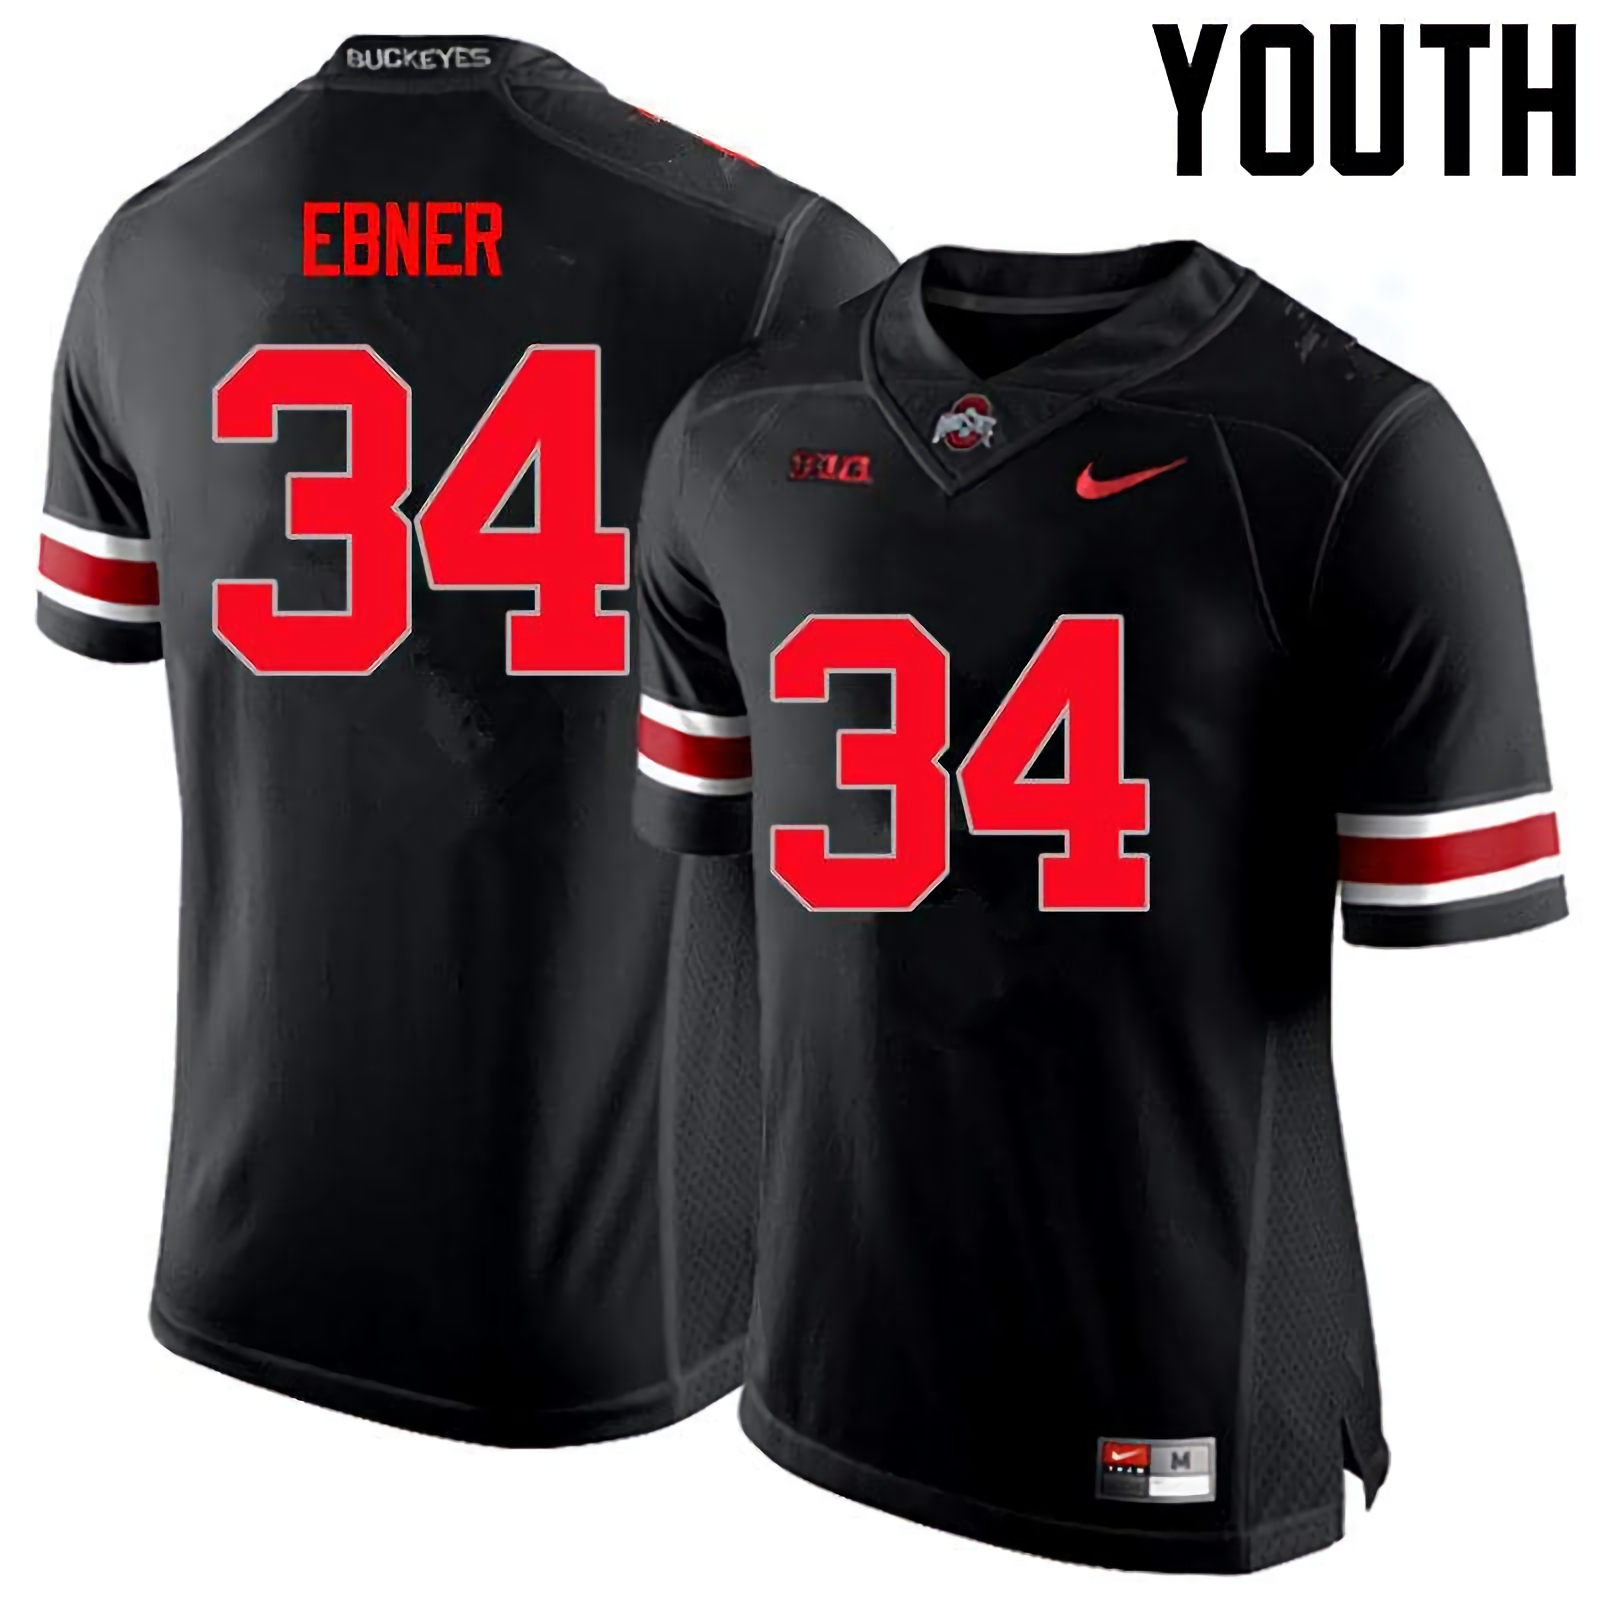 Nate Ebner Ohio State Buckeyes Youth NCAA #34 Nike Black Limited College Stitched Football Jersey ATA7056EV